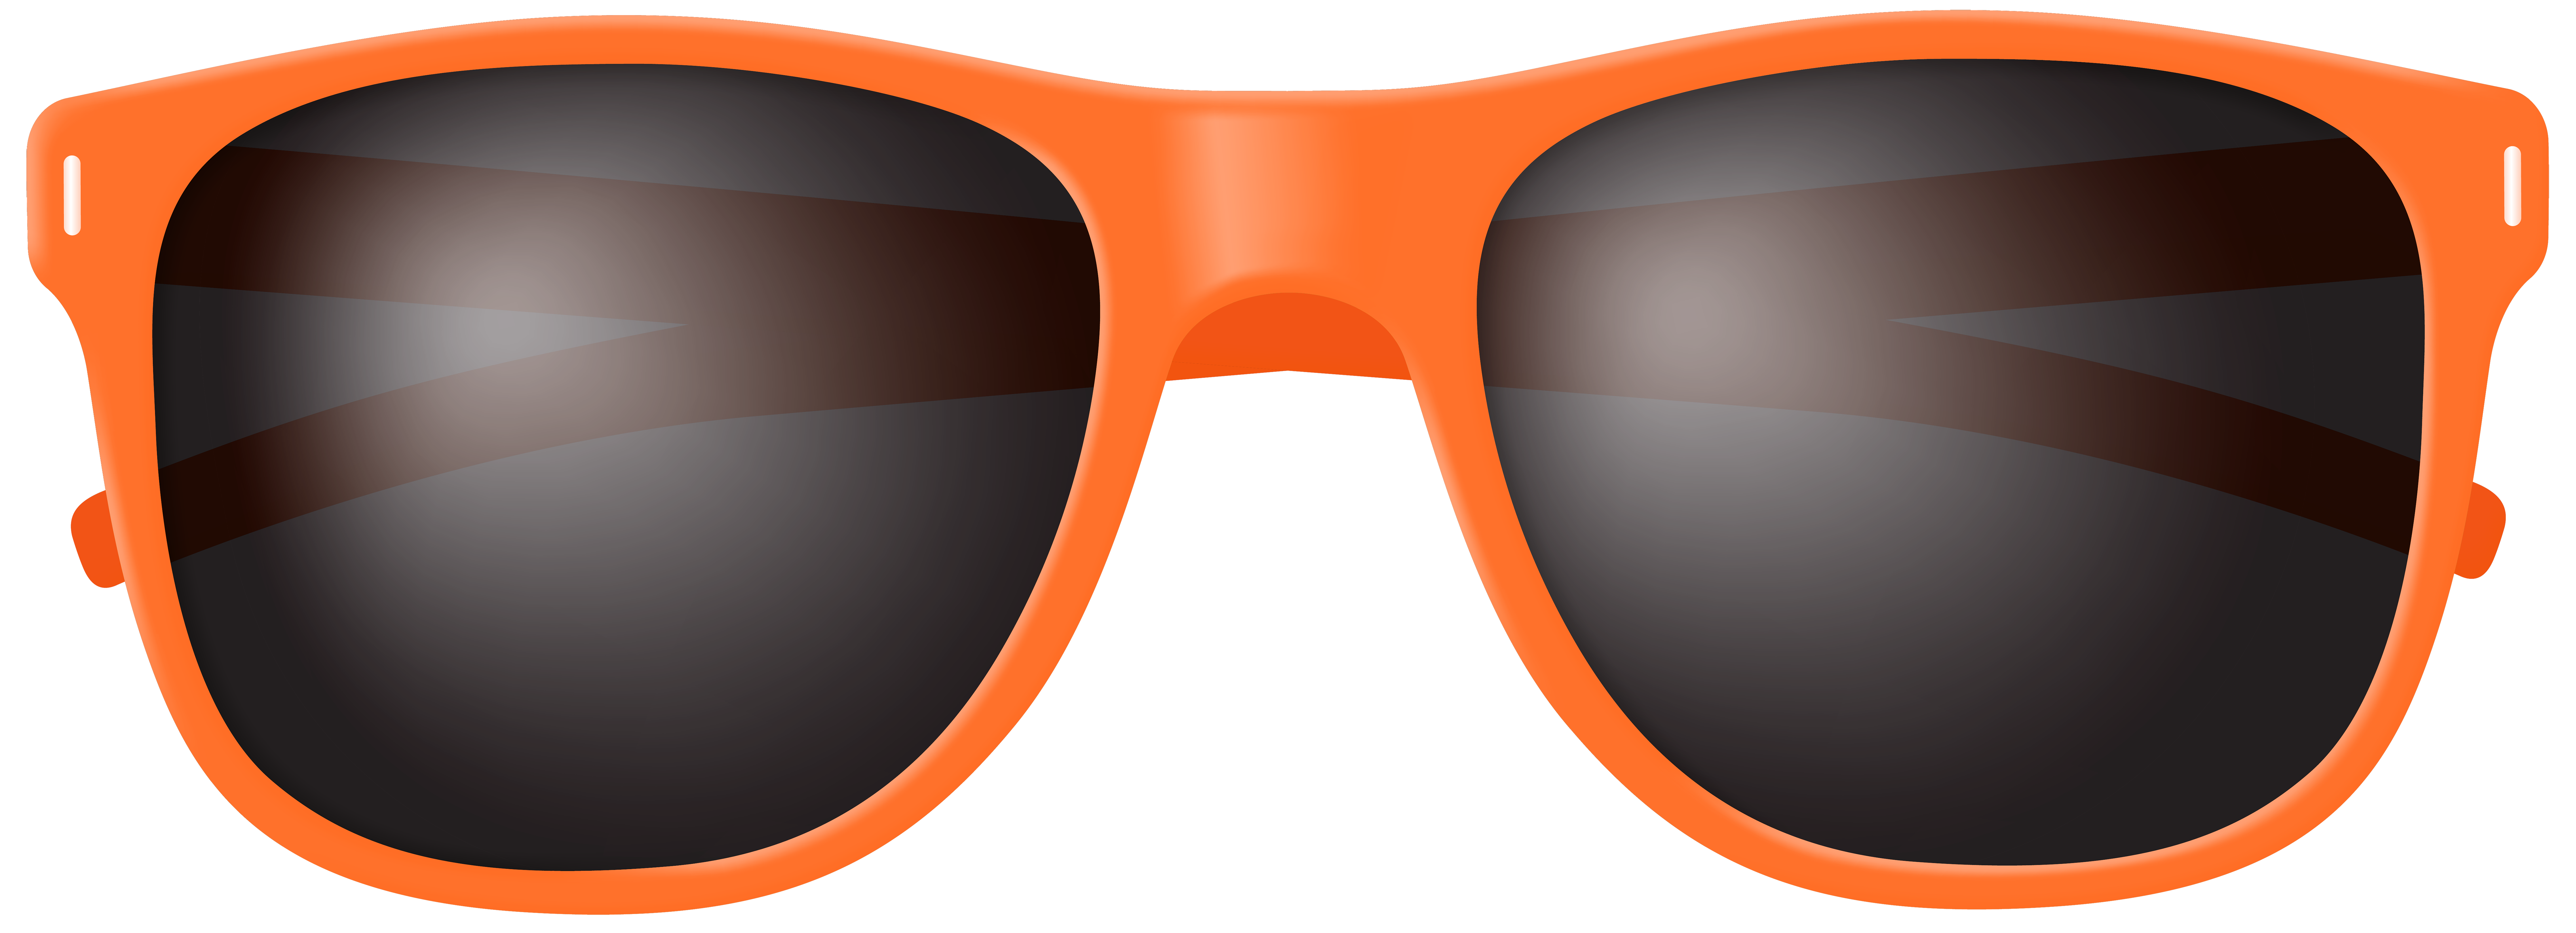 Sunglass Cliparts - Add a Cool and Stylish Touch to Your Design Projects